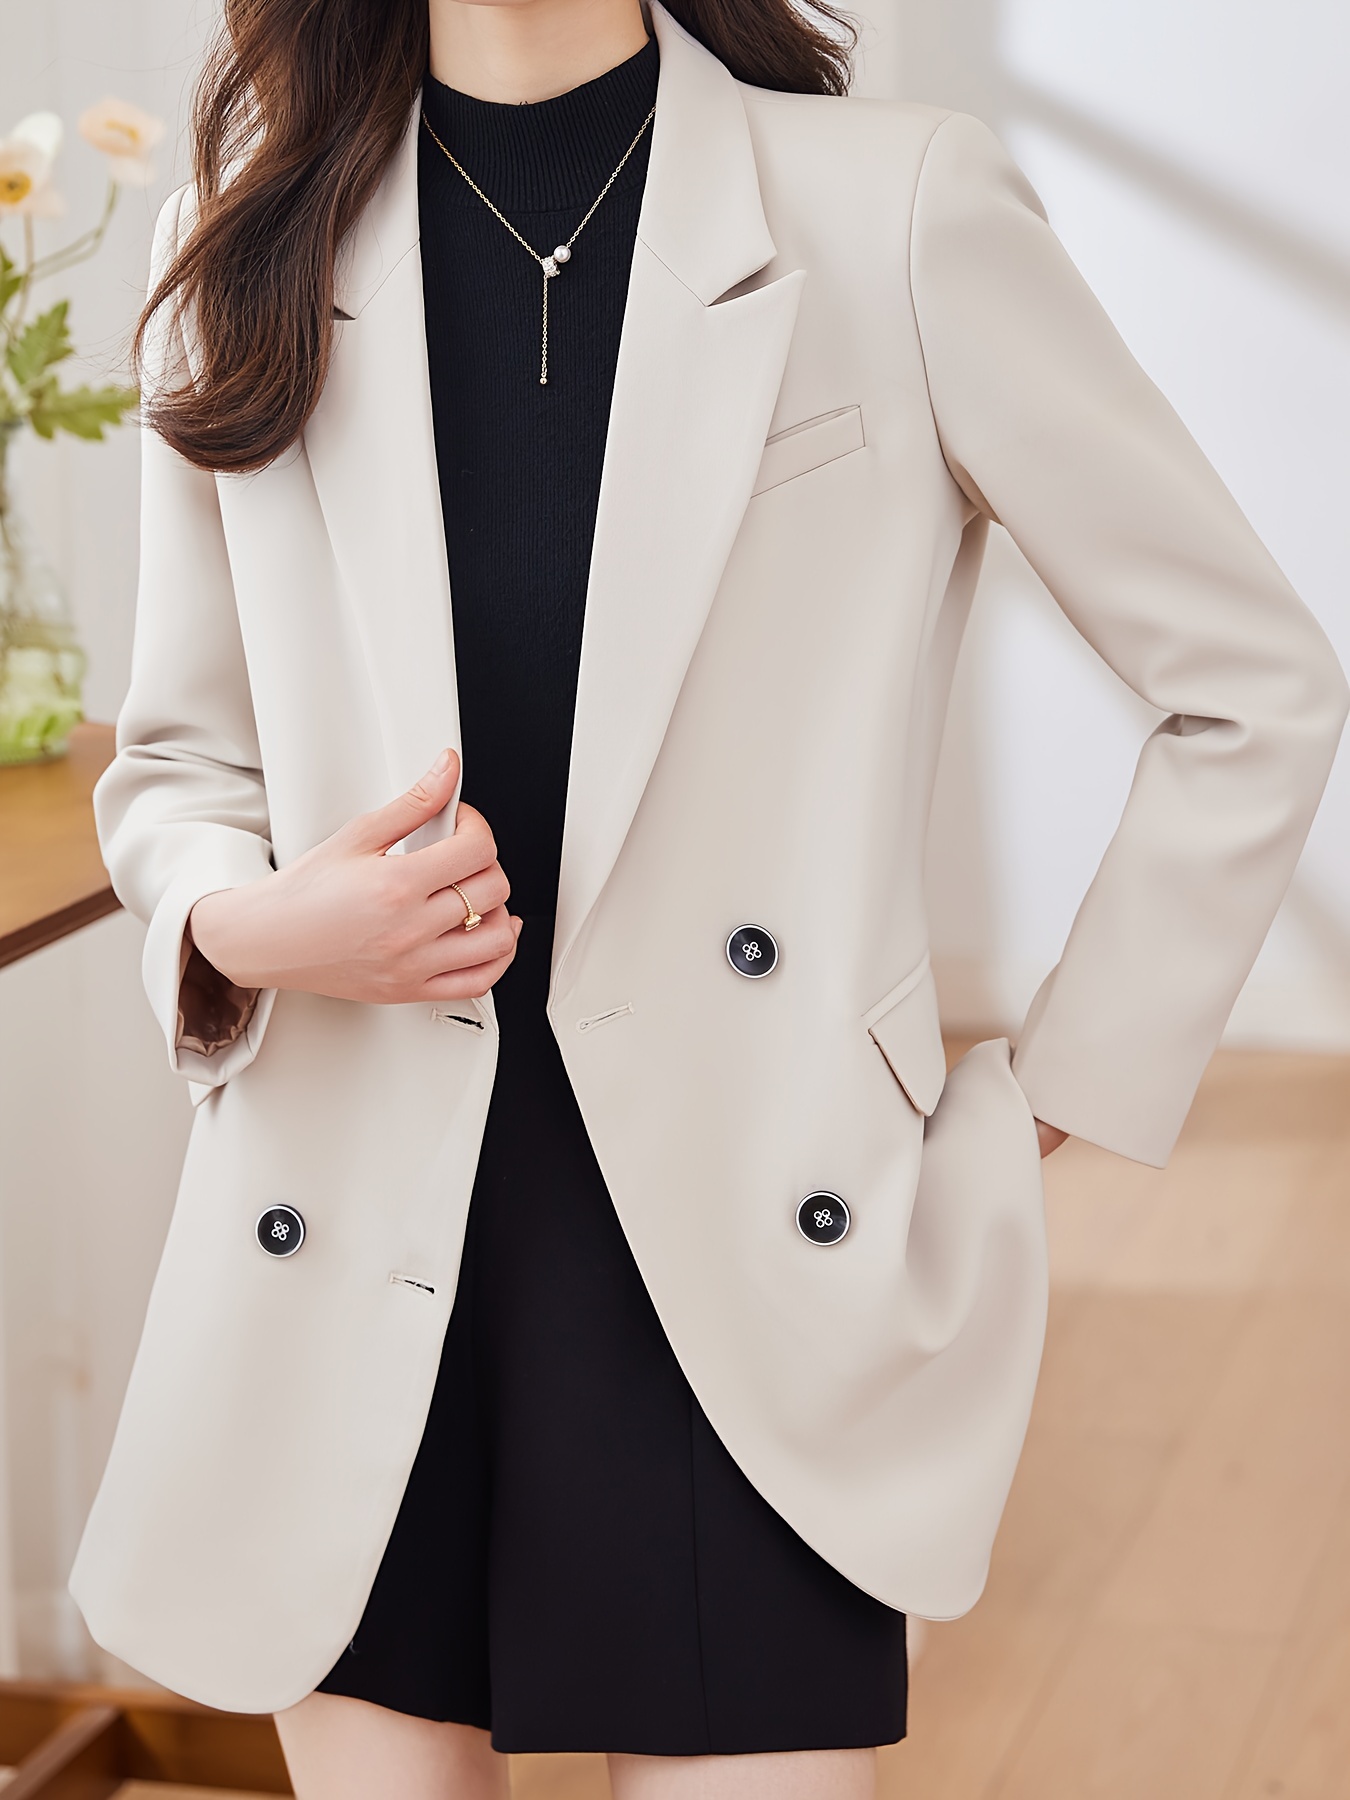 Notched Collar Double-breasted Blazer, Elegant Long Sleeve Blazer For Office & Work, Women s Clothing details 12